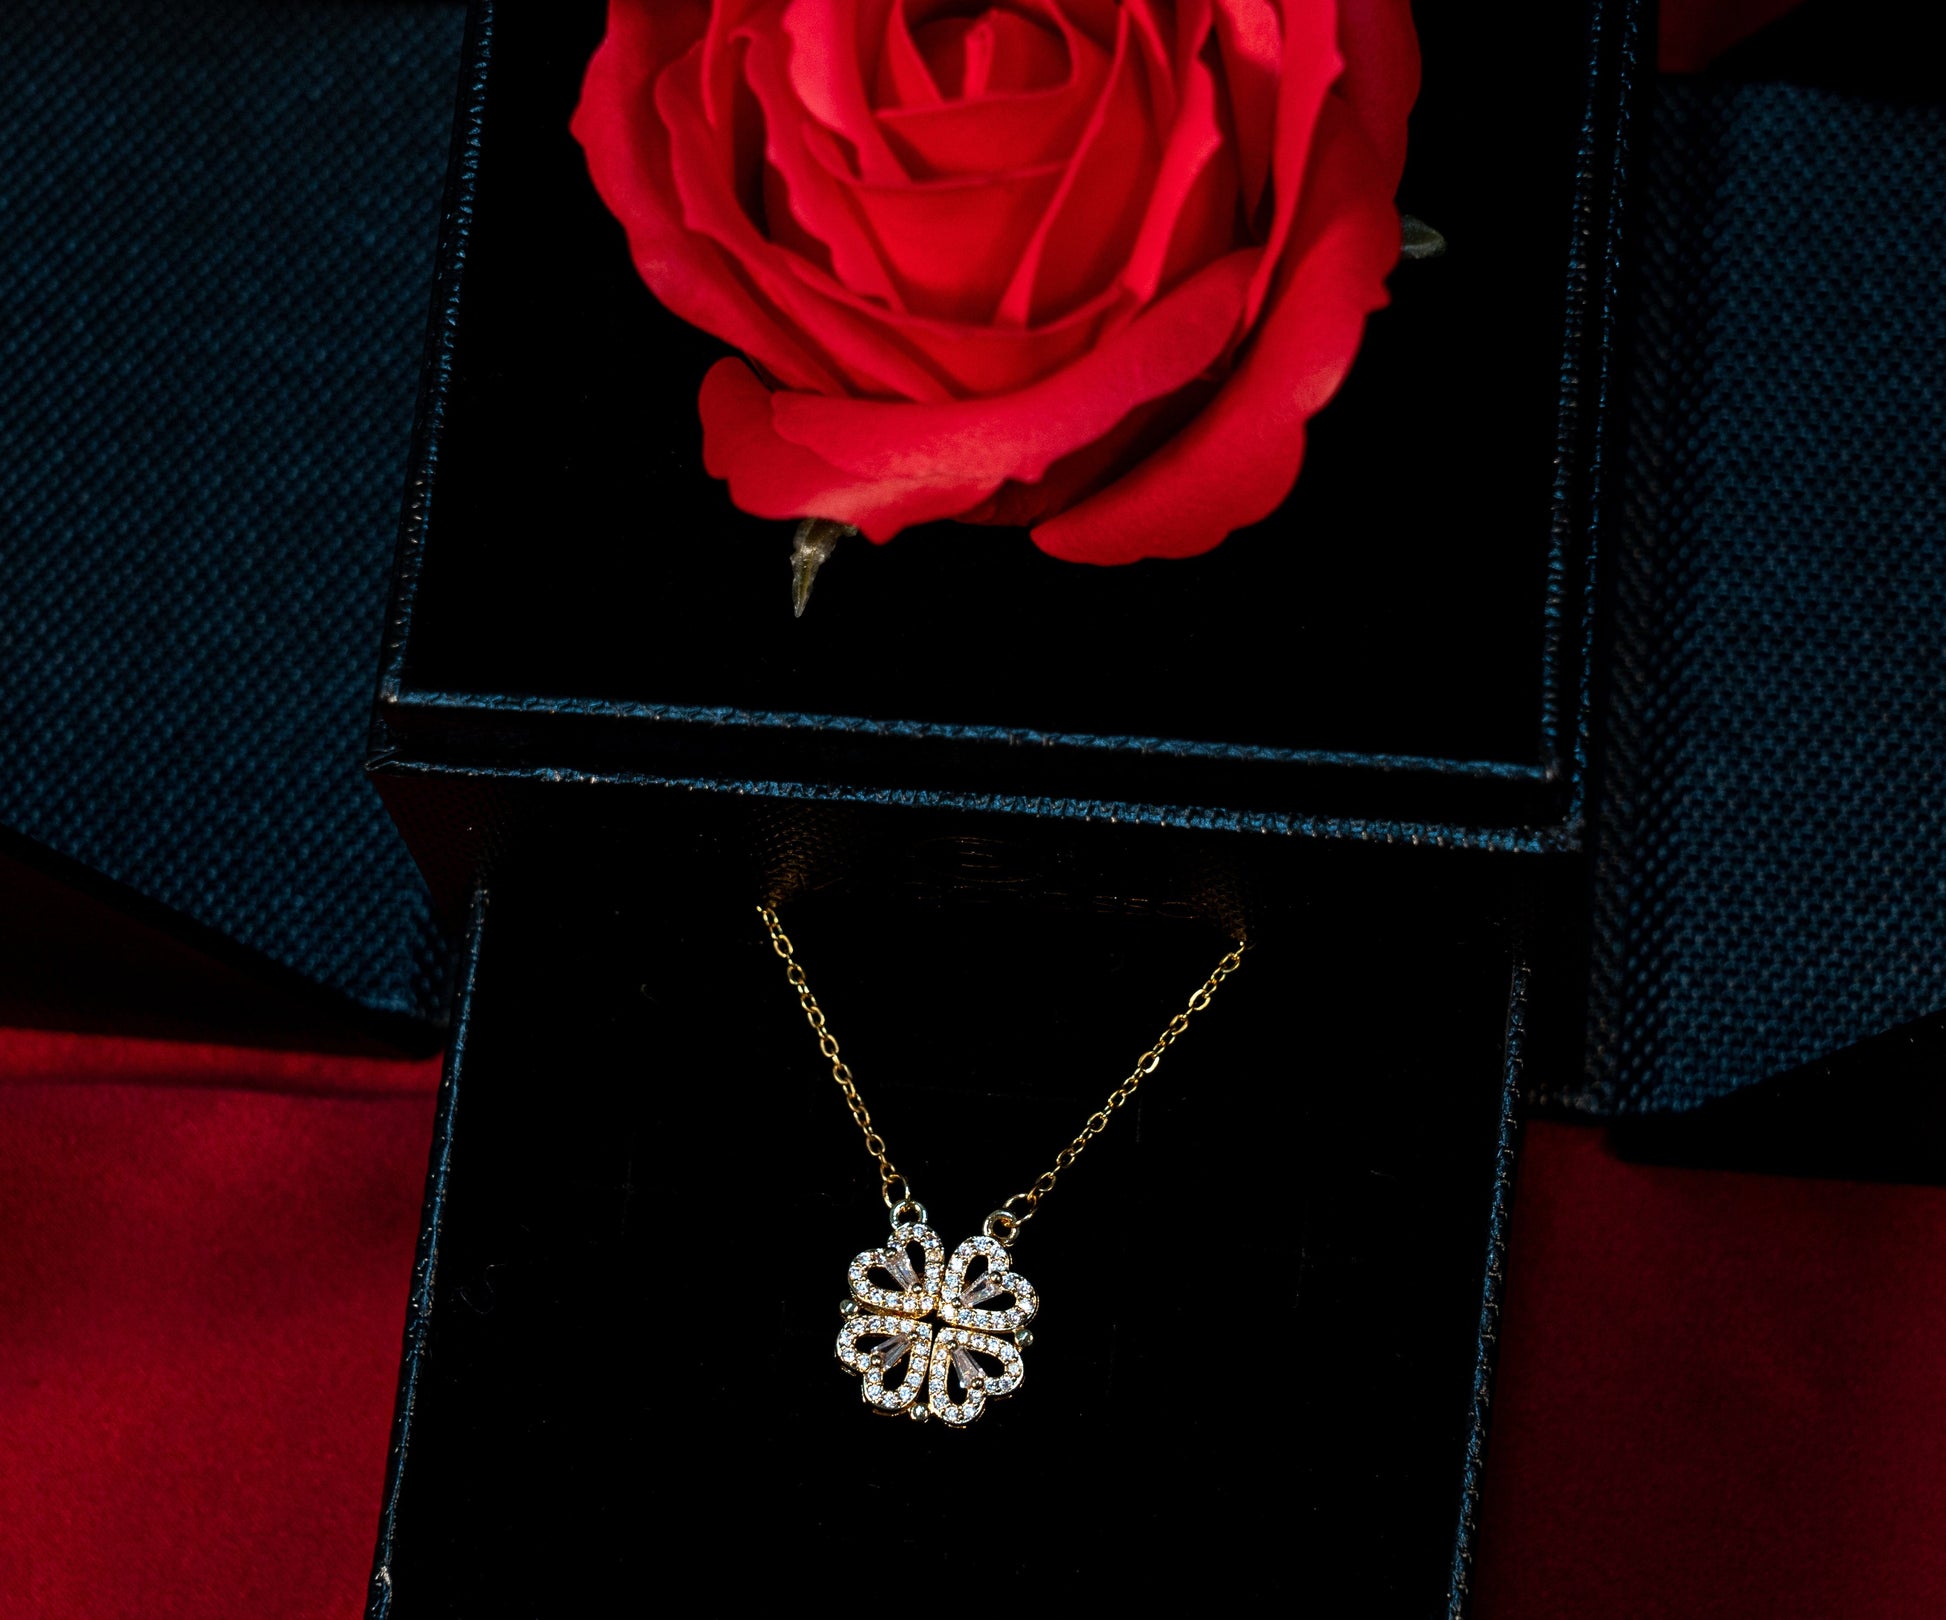 bianco rosso Rose Box Lucky Charm / Gold Valentine's Gift Box - Lucky Charm cyprus greece jewelry gift free shipping europe worldwide